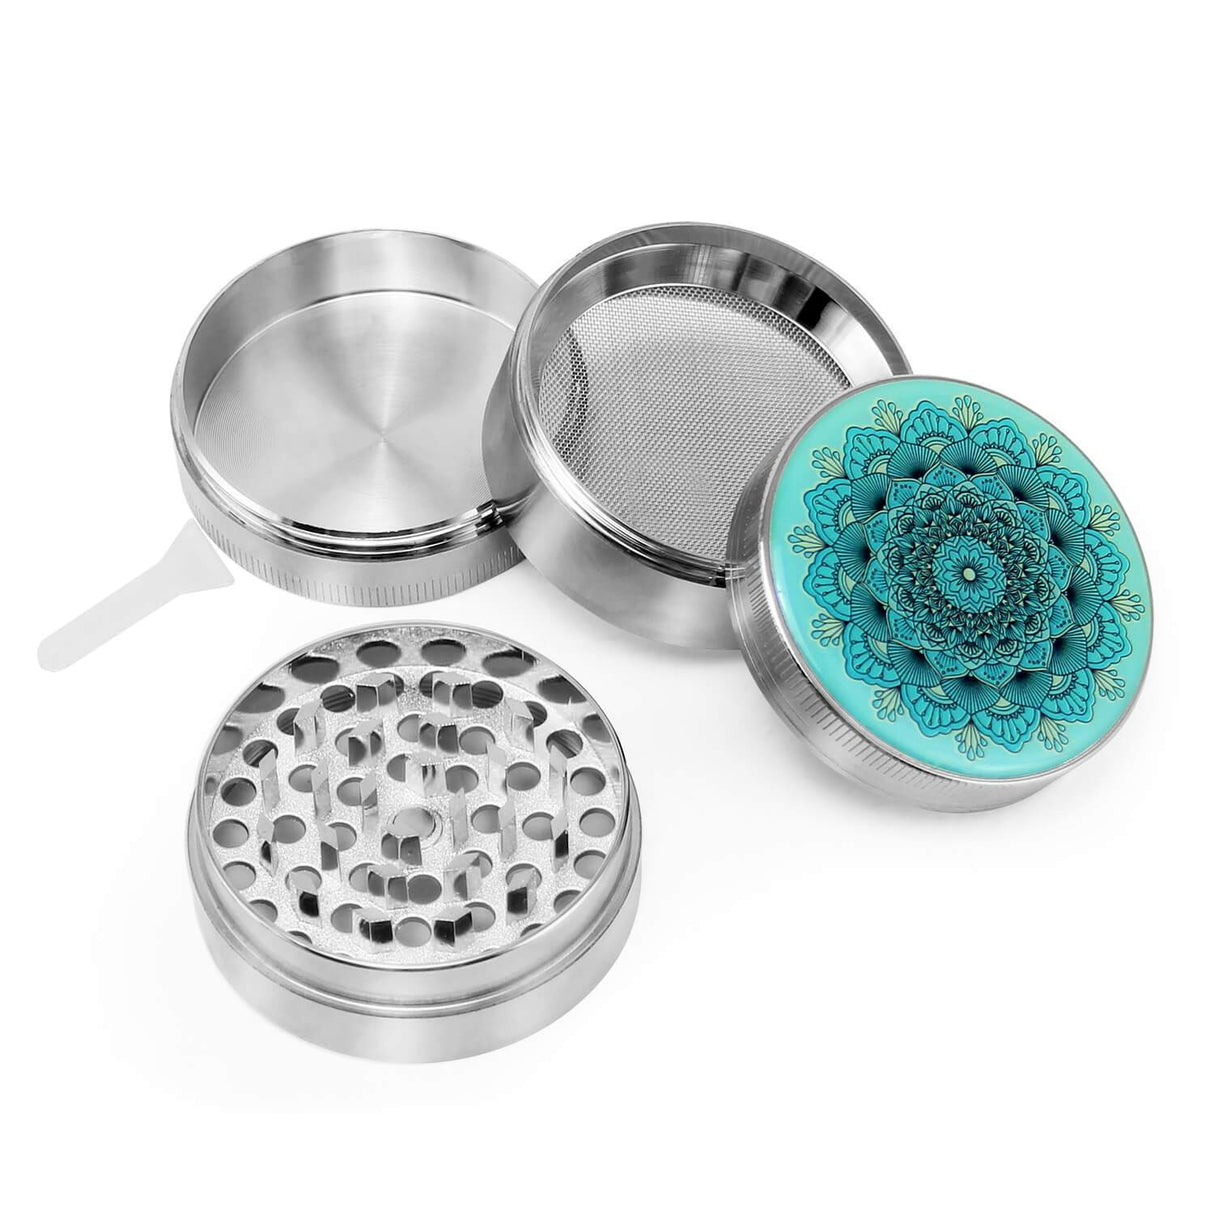 PILOT DIARY Mandala Grinder Silver with intricate blue design, displayed open with mesh screen